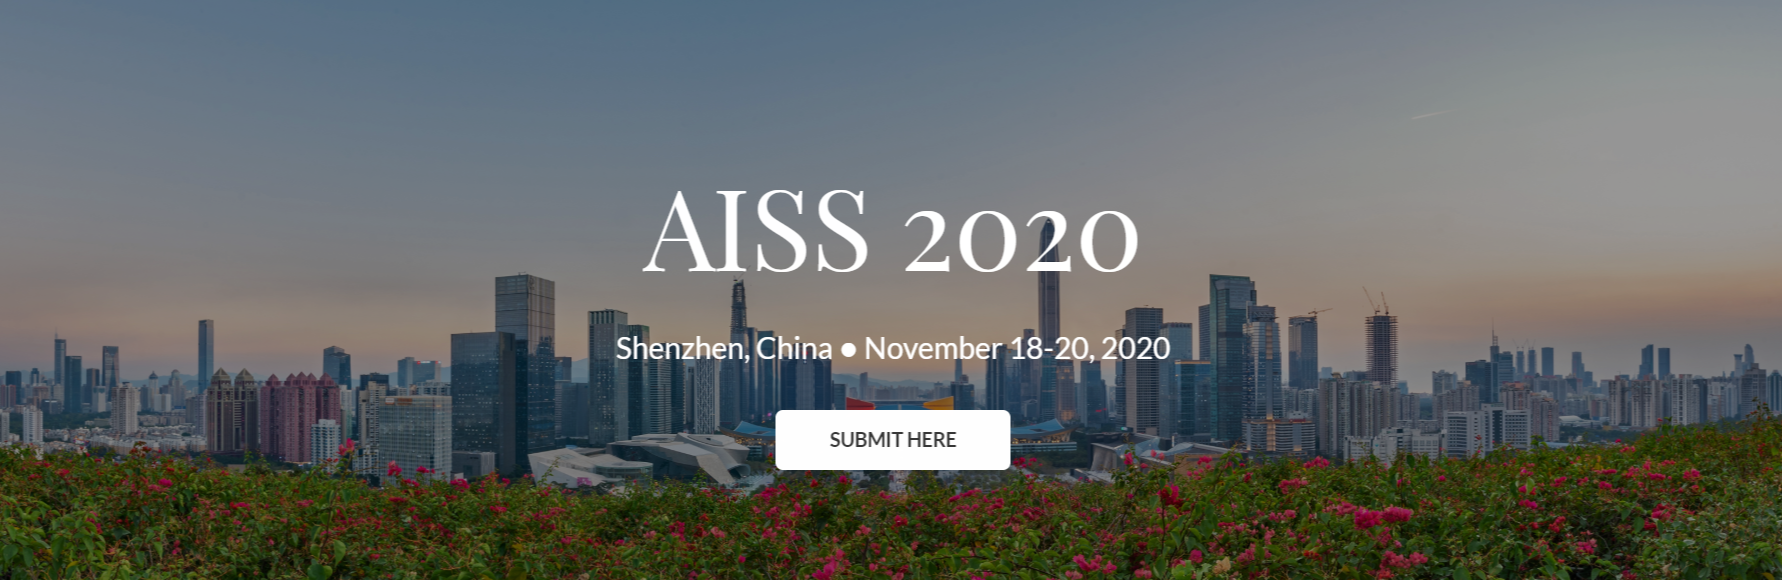 2020 2nd International Conference on Advanced Information Science and System (AISS 2020), Shenzhen, Guangdong, China